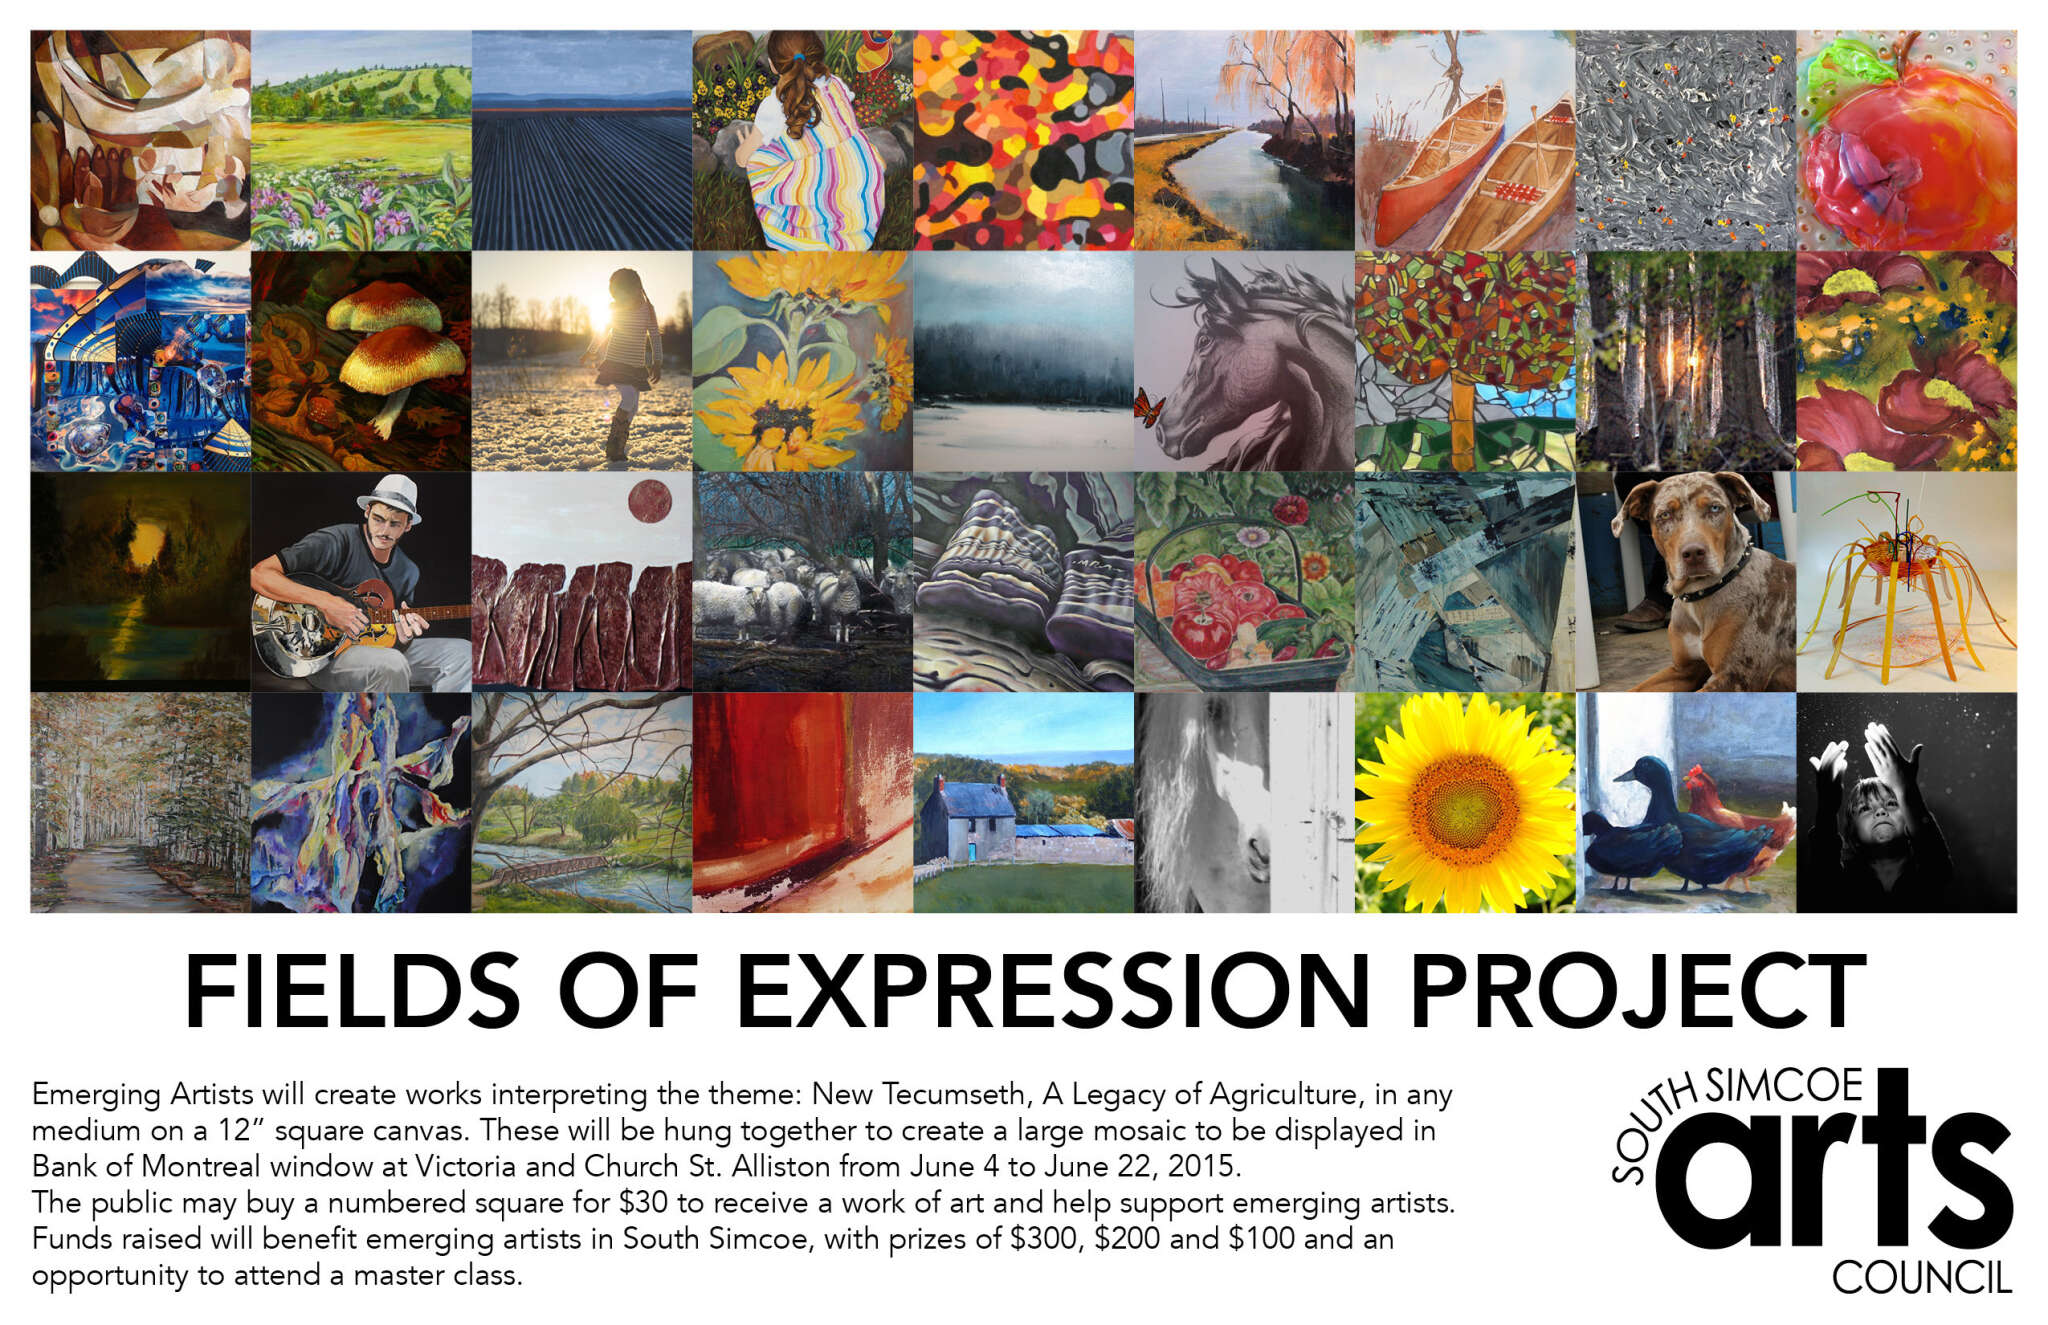 Fields of Expression Projects for Emerging Artists and Juried Show for Experienced Artists - Call for Artists  for Fields of Expression Projects and Call for Youth Artists